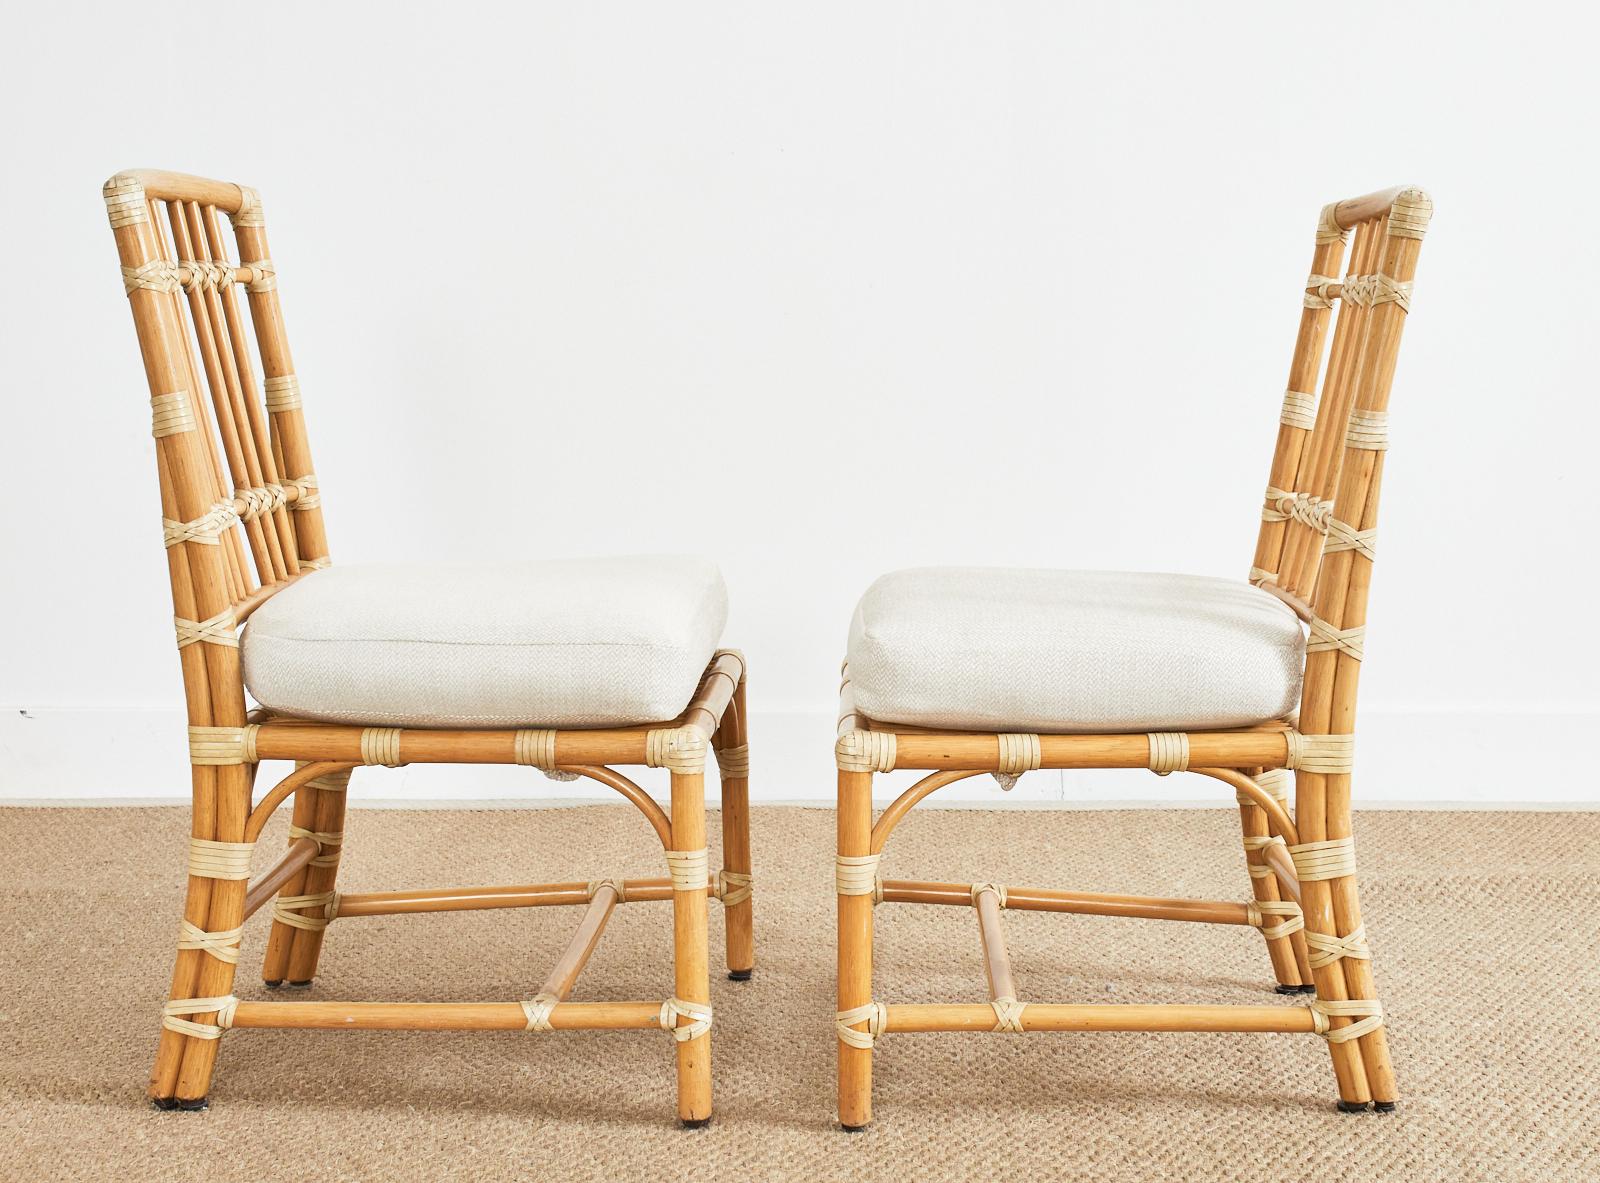 Hand-Crafted Pair of McGuire Organic Modern Rattan Balboa Dining Chairs